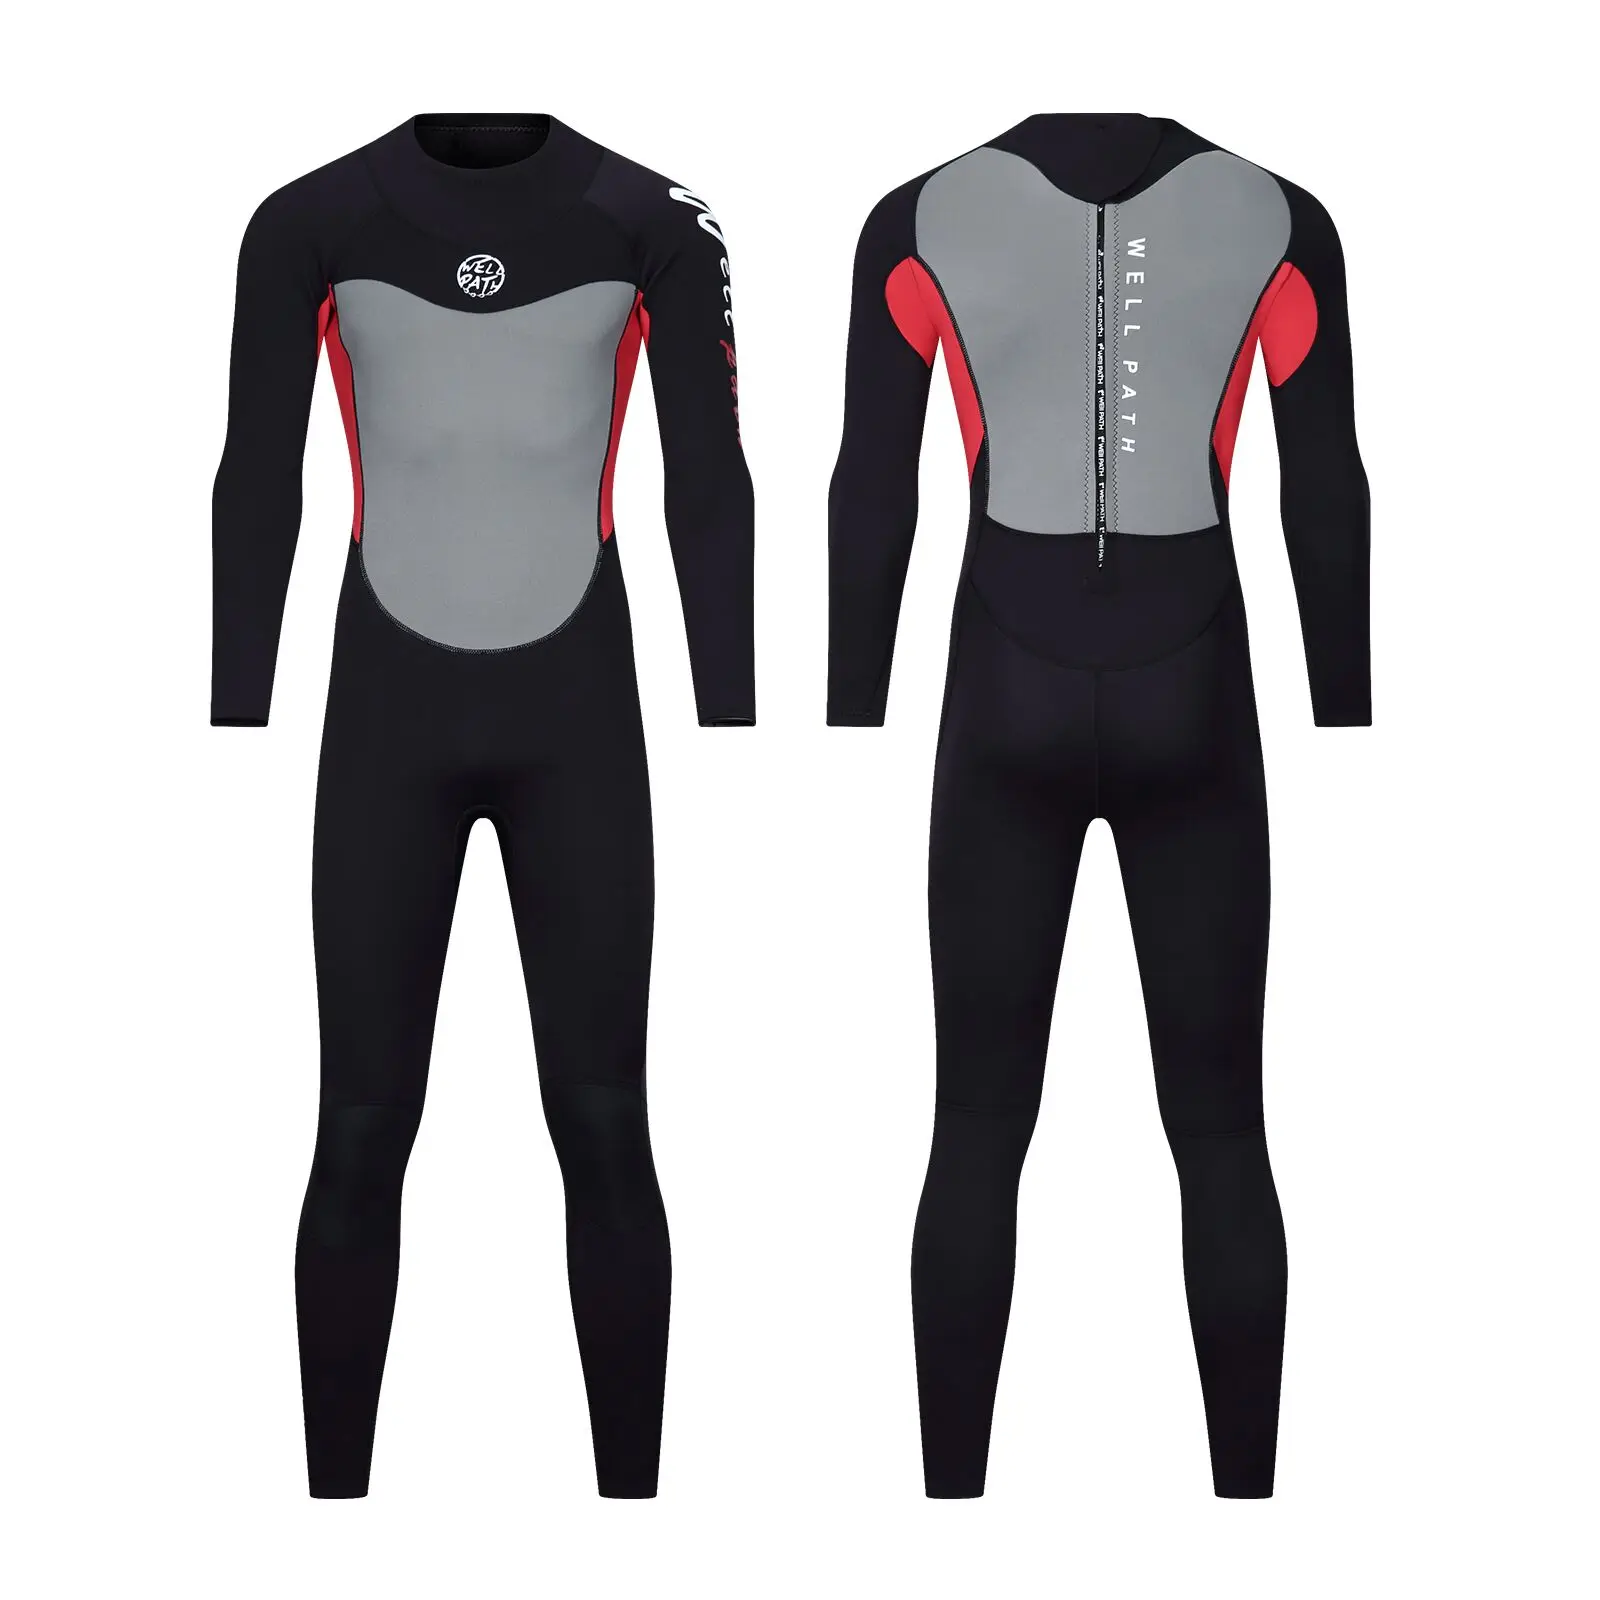 

Style 8001B Neoprenanzug Diving Clothes Wetsuit 3mm Wet Suit Neoprene Traje De Buceo Men Swim Diving Spearfishing Surf Wetsuit, Red,blue, customized